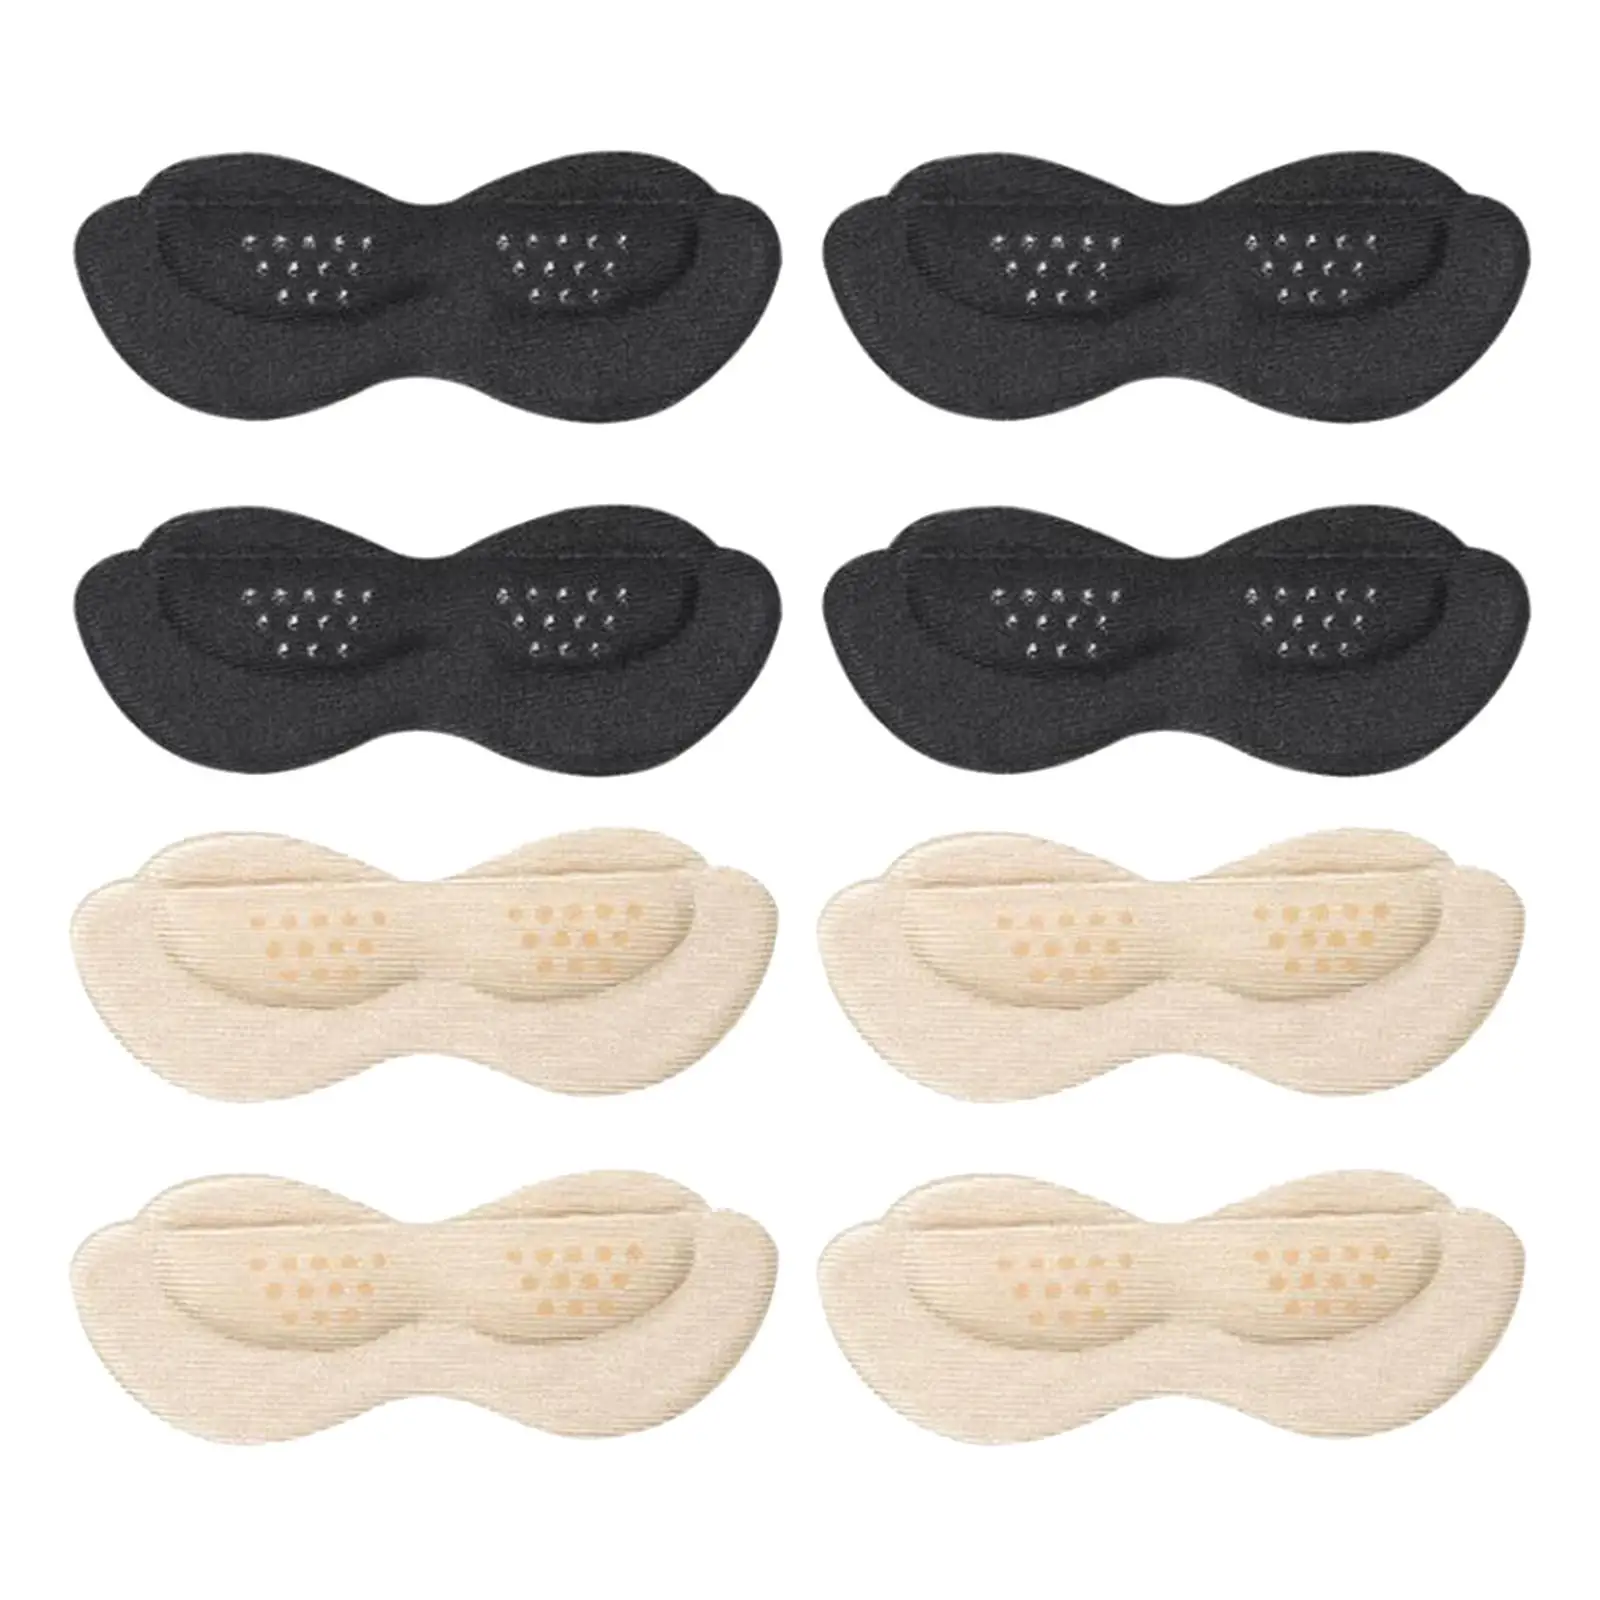 

Shoes Heel Protectors Anti-Wear Adhesive Liner Protection Insoles for Prevent Slipping